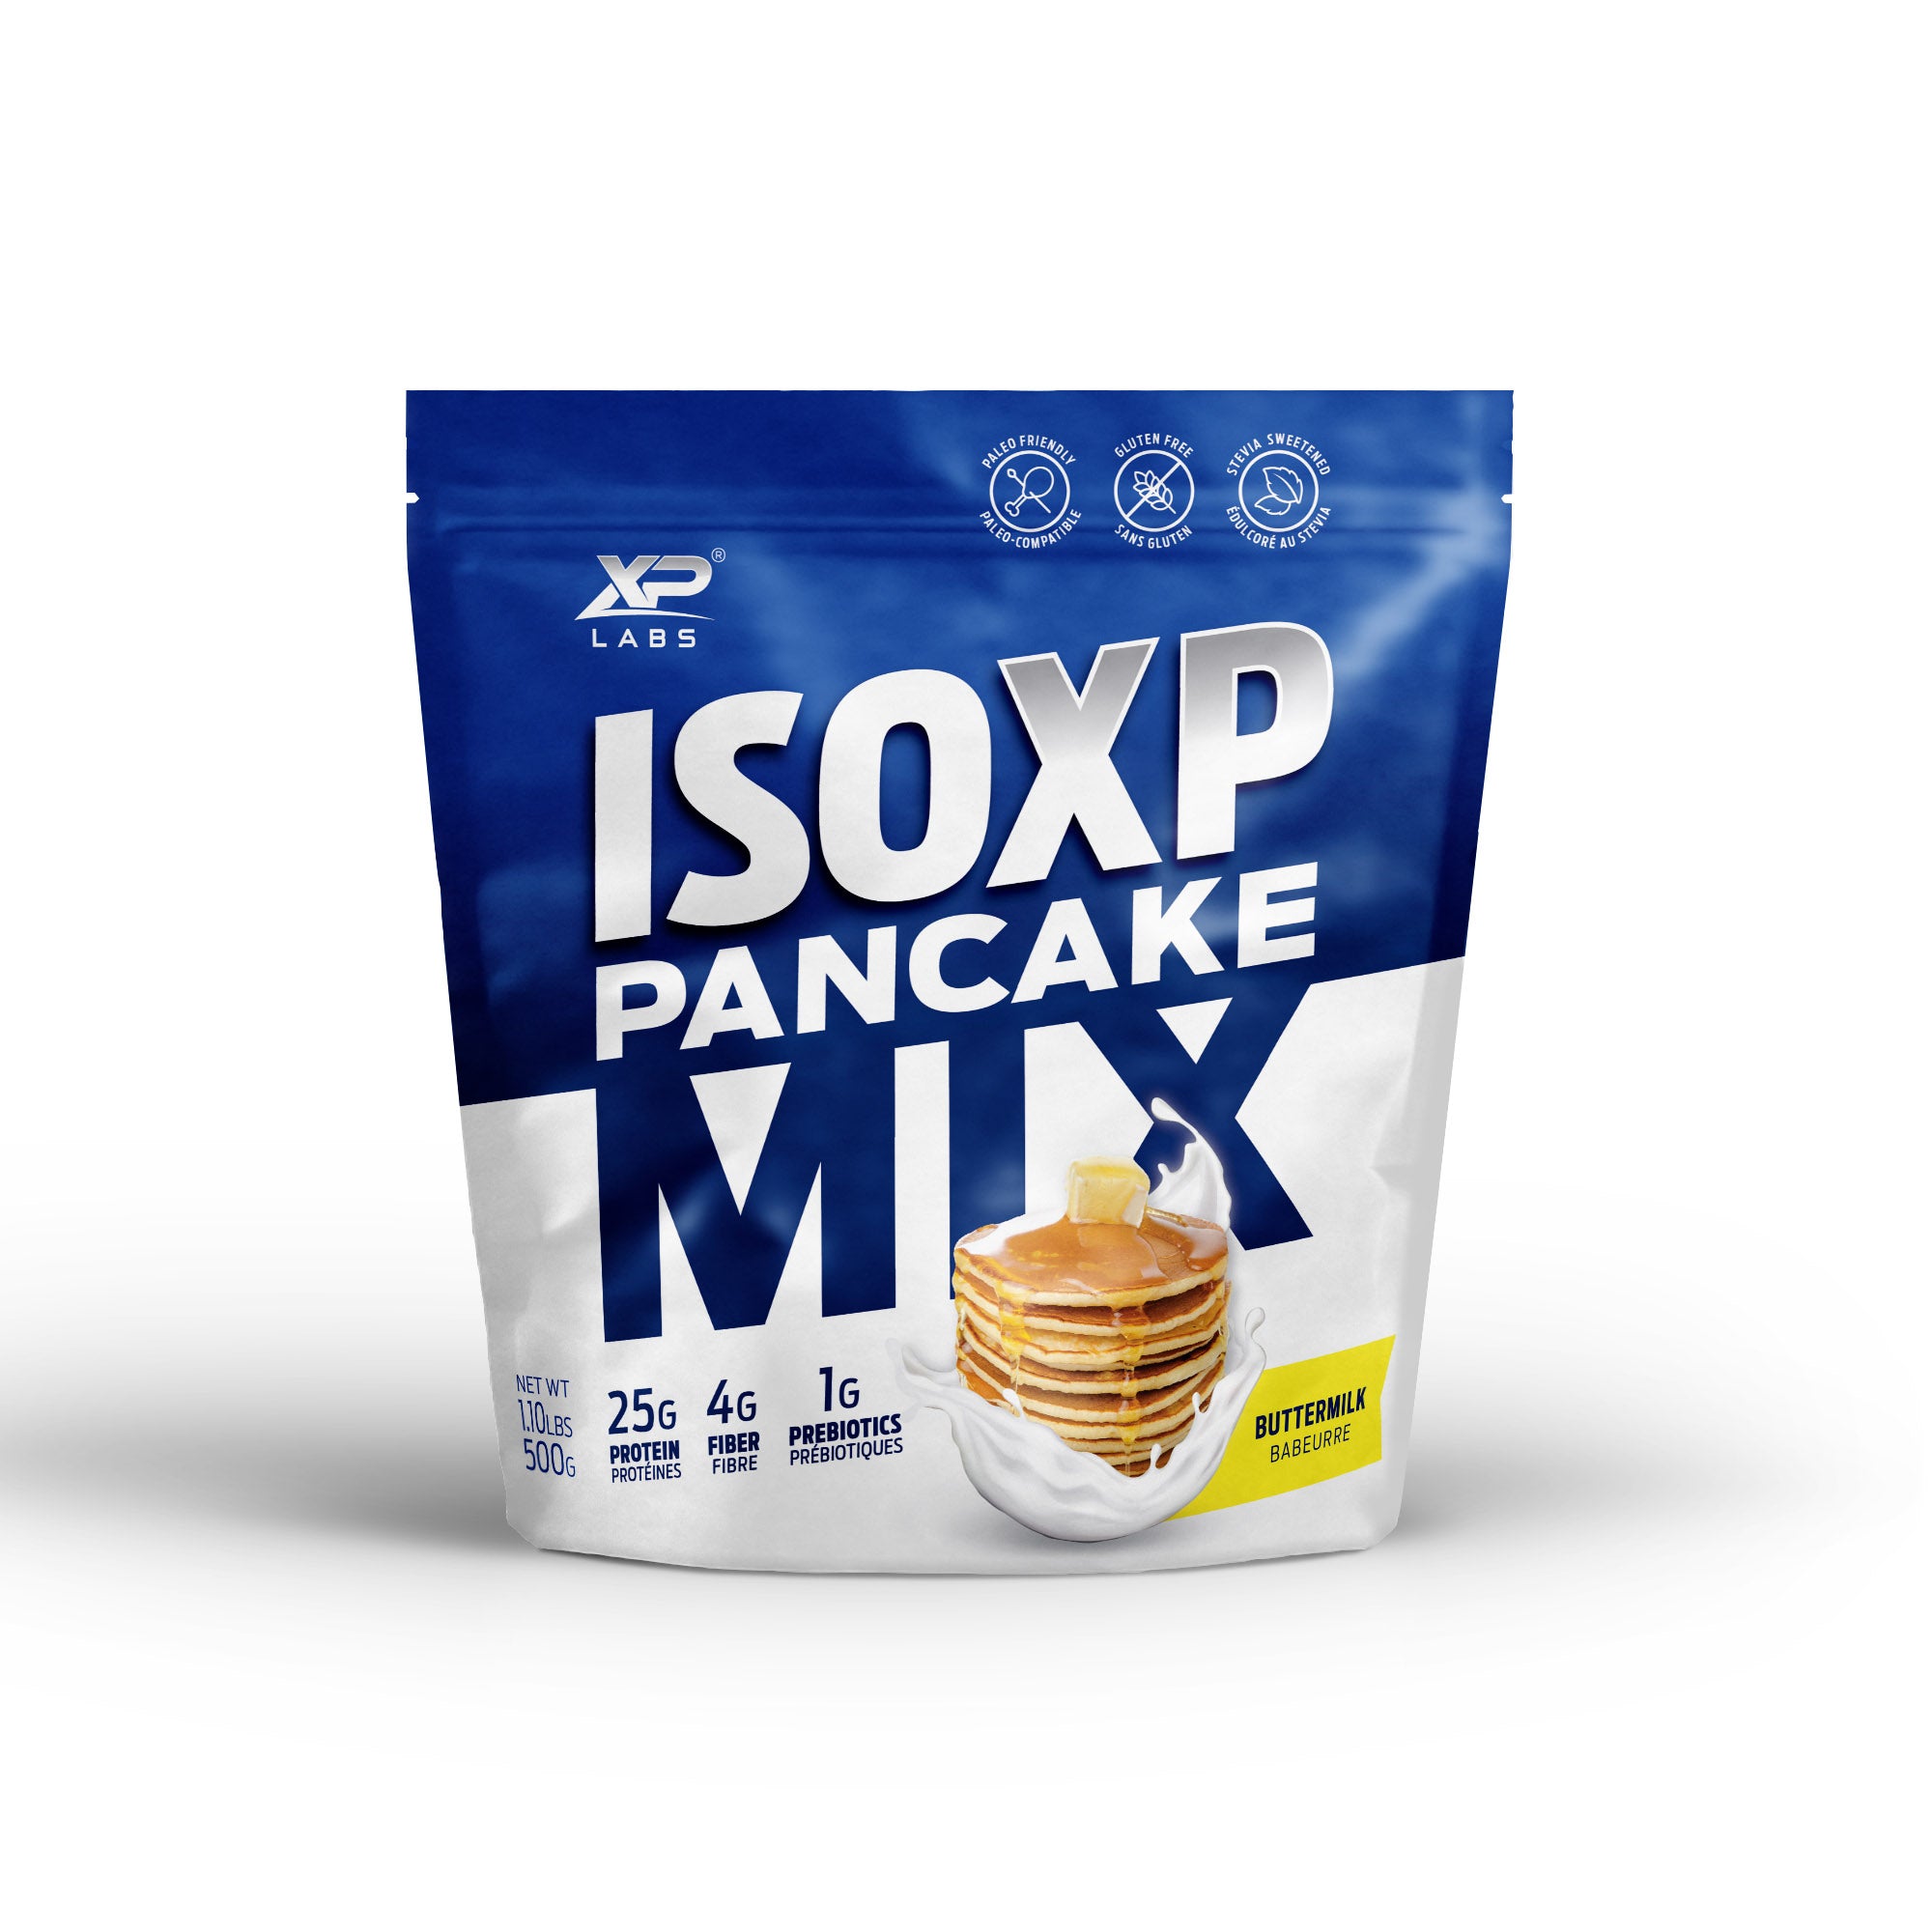 ISO XP Protein Pancake Mix 500g XPLabs Top Nutrition Canada